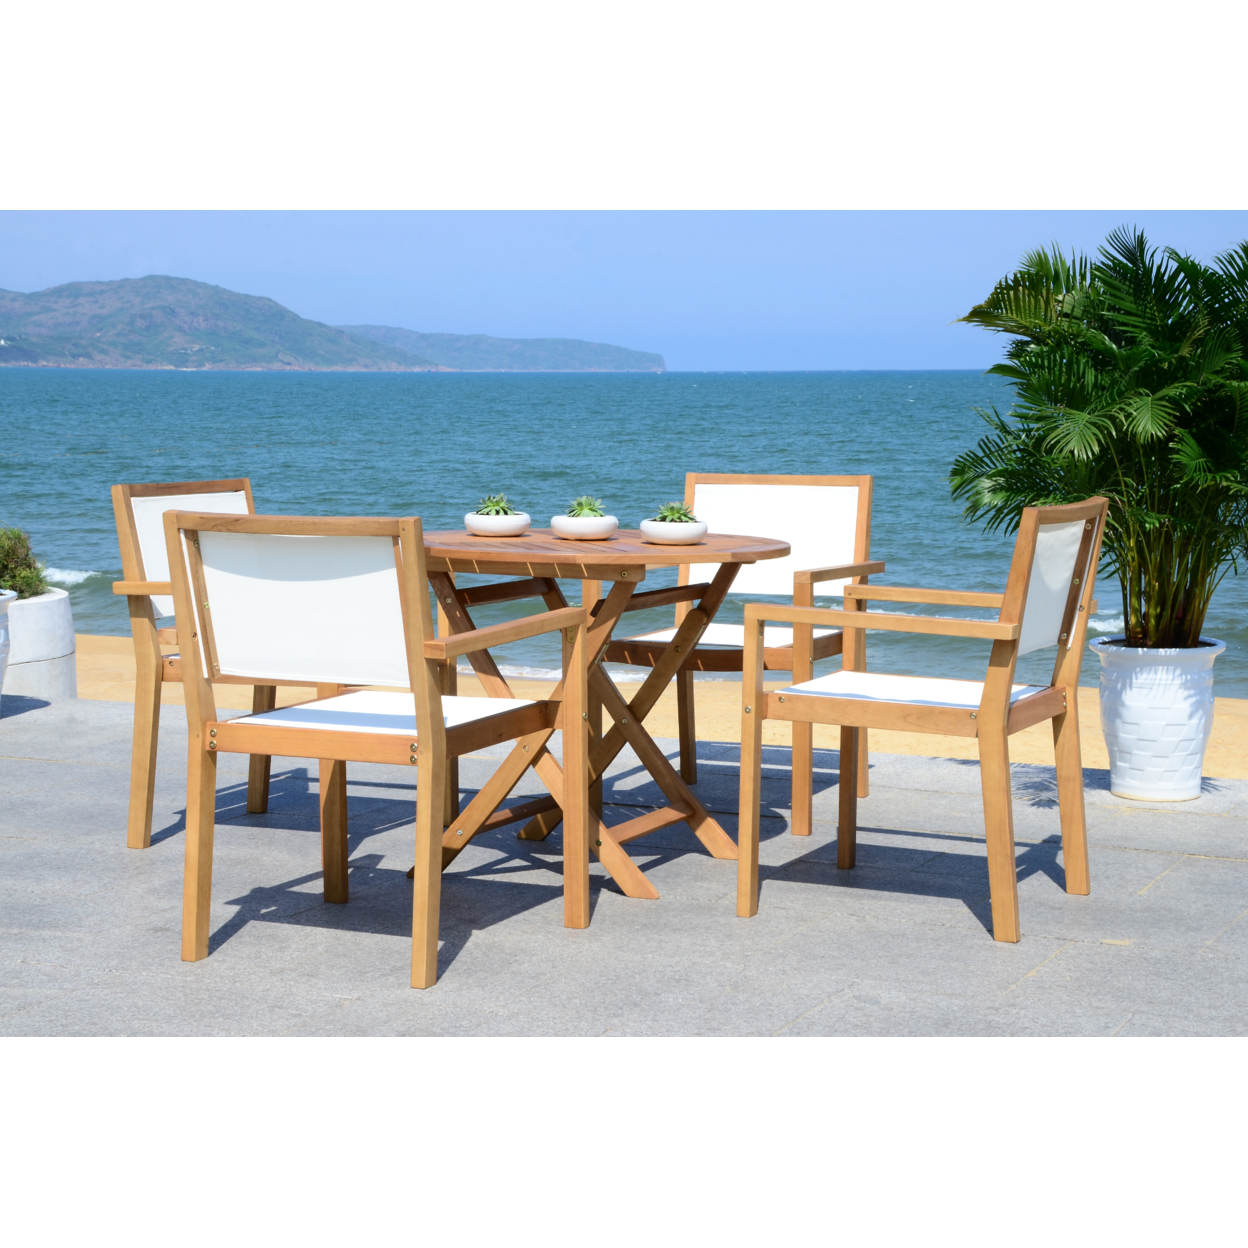 SAFAVIEH Outdoor Collection Chante Round Table 5-Piece Dining Set Natural